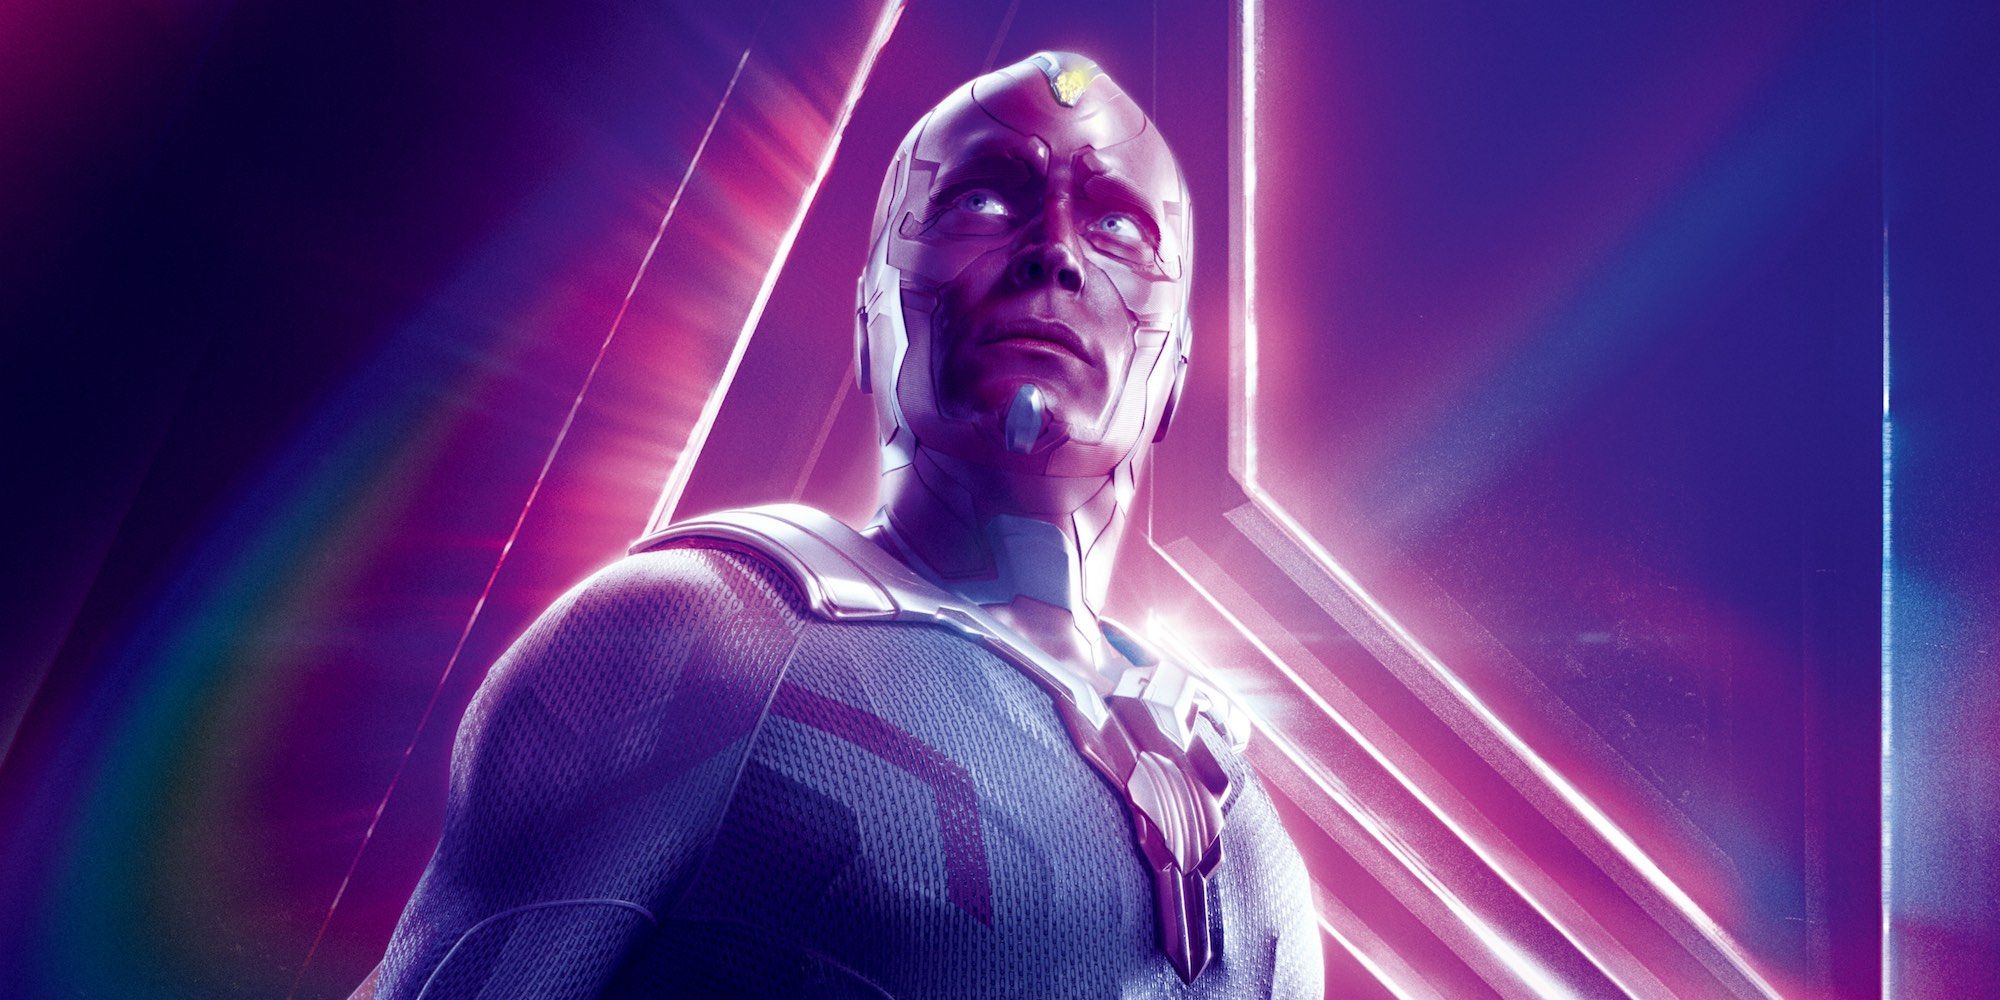 Paul Bettany as Vision in Avengers Infinity War poster